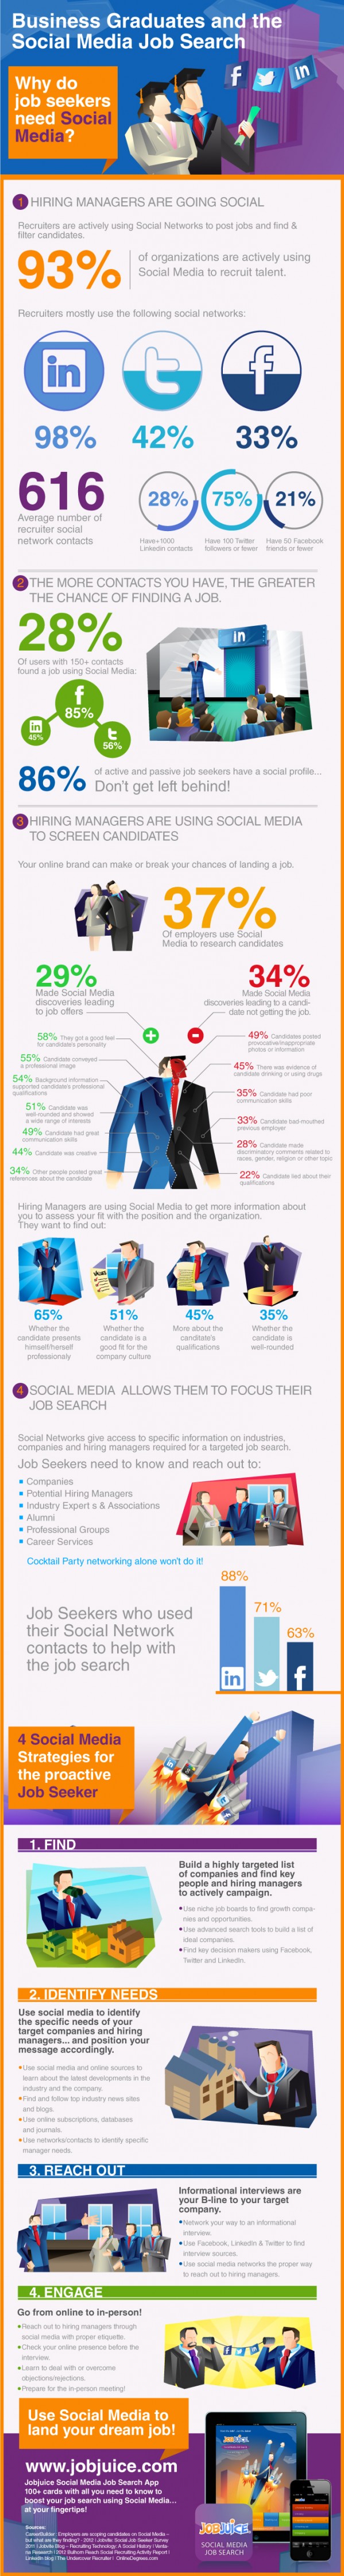 Why Do Jobseekers Need Social Media [INFOGRAPHIC]